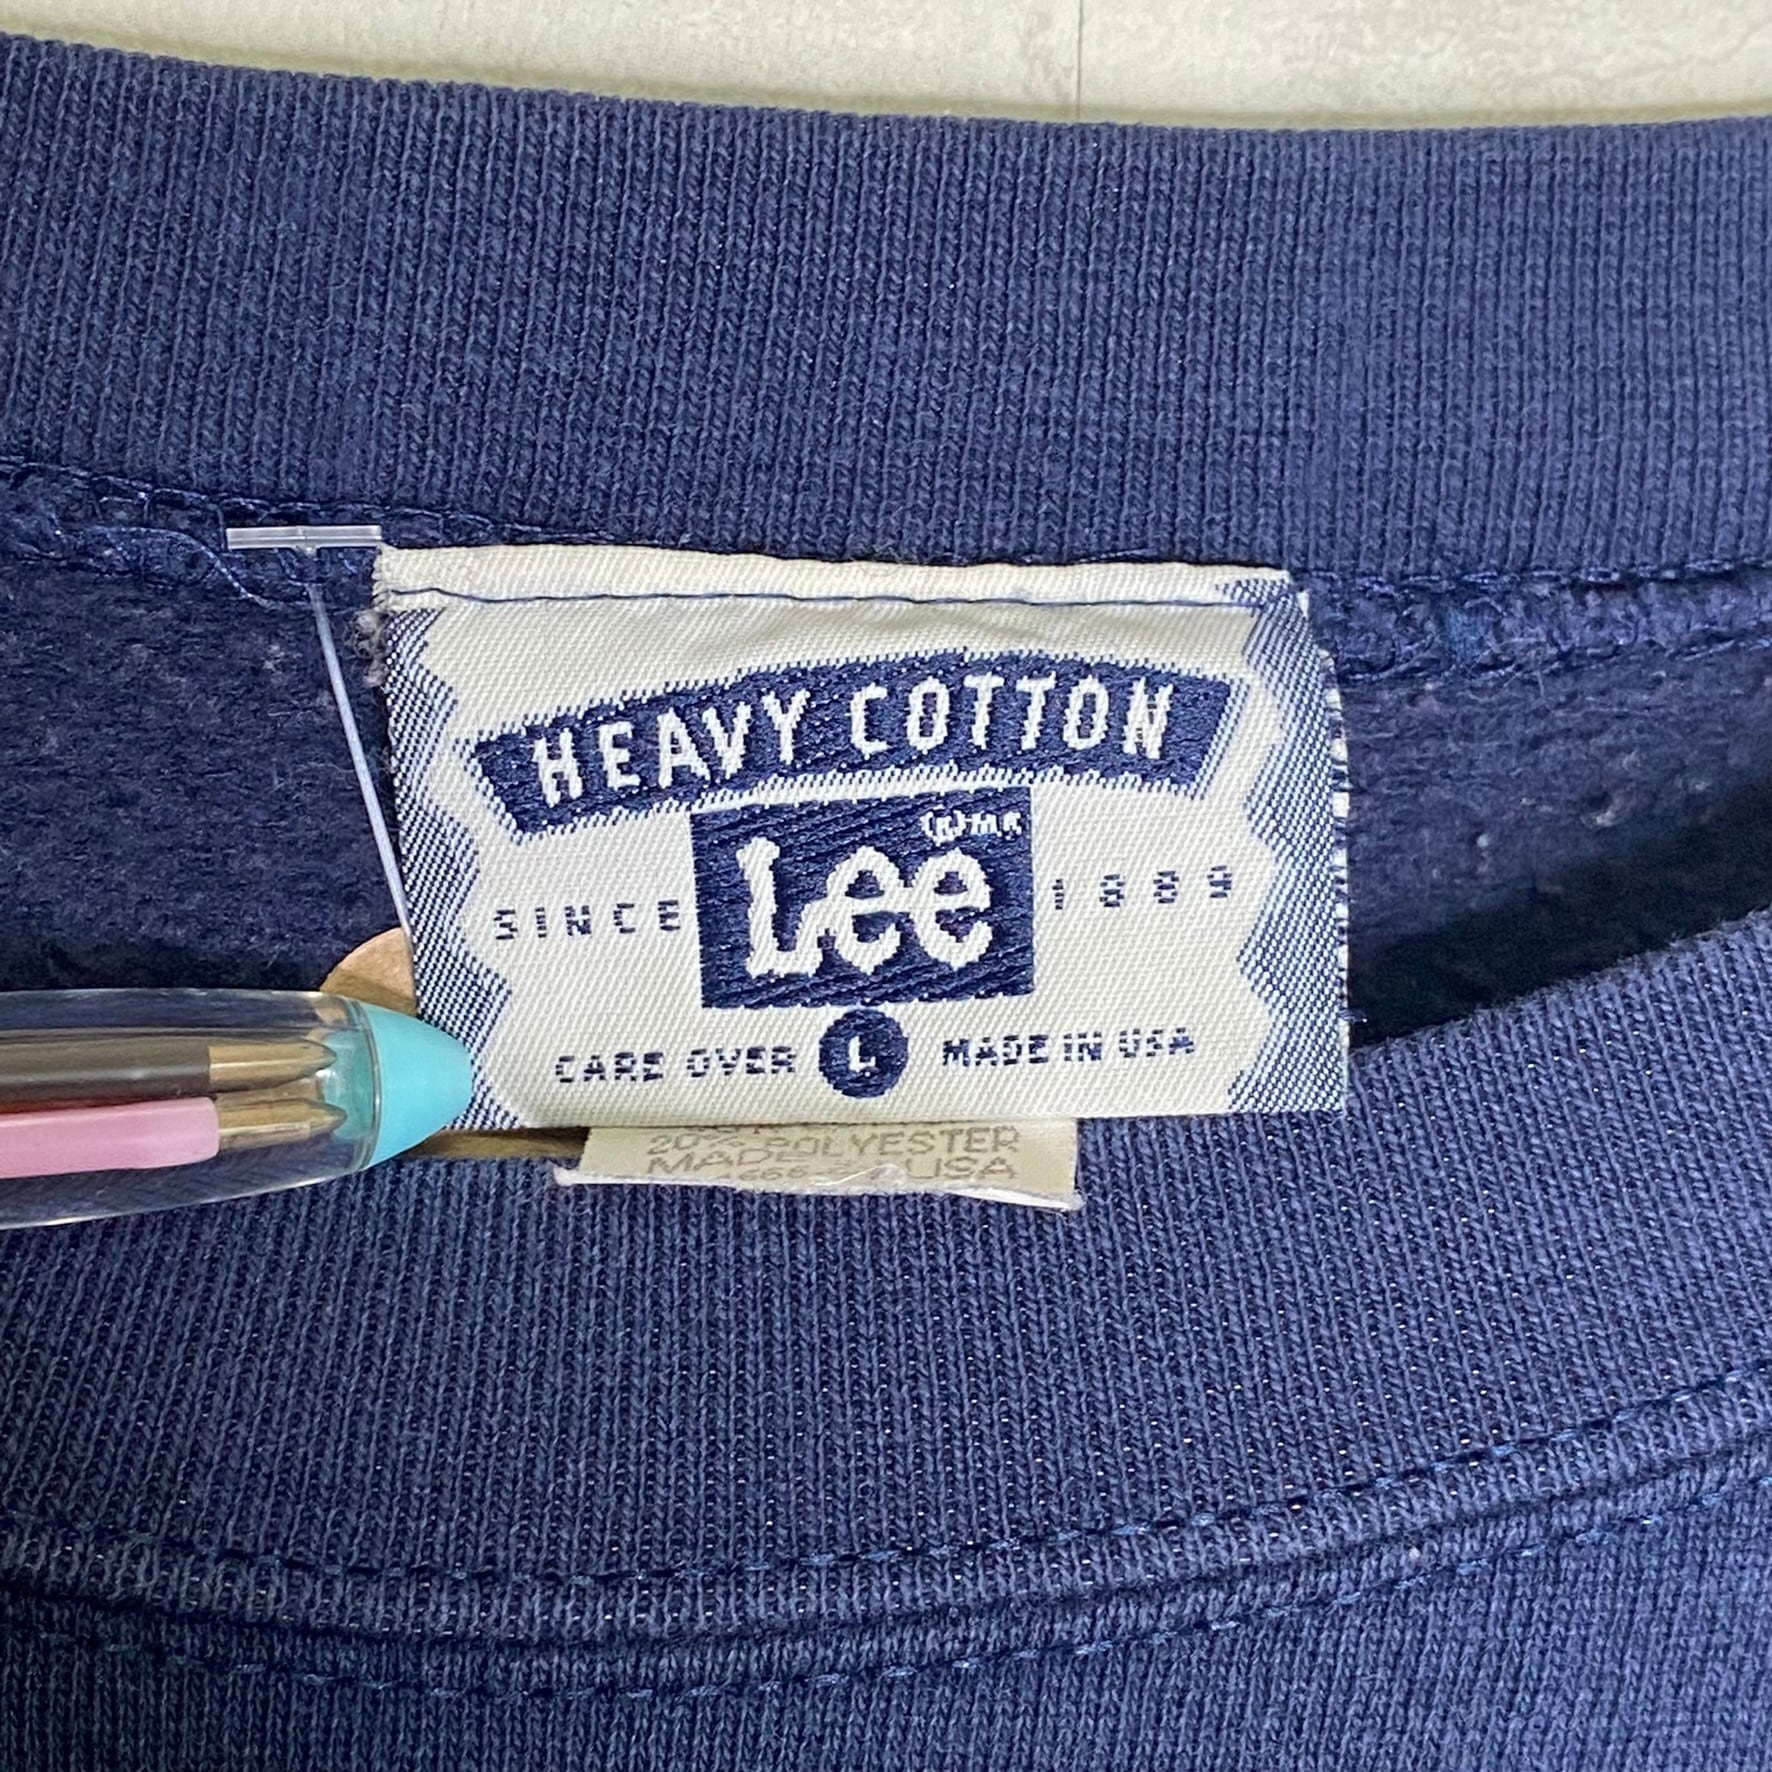 Made in USA】Lee スウェット L（XL相当） 刺繍 厚手 | 古着屋OLDGREEN